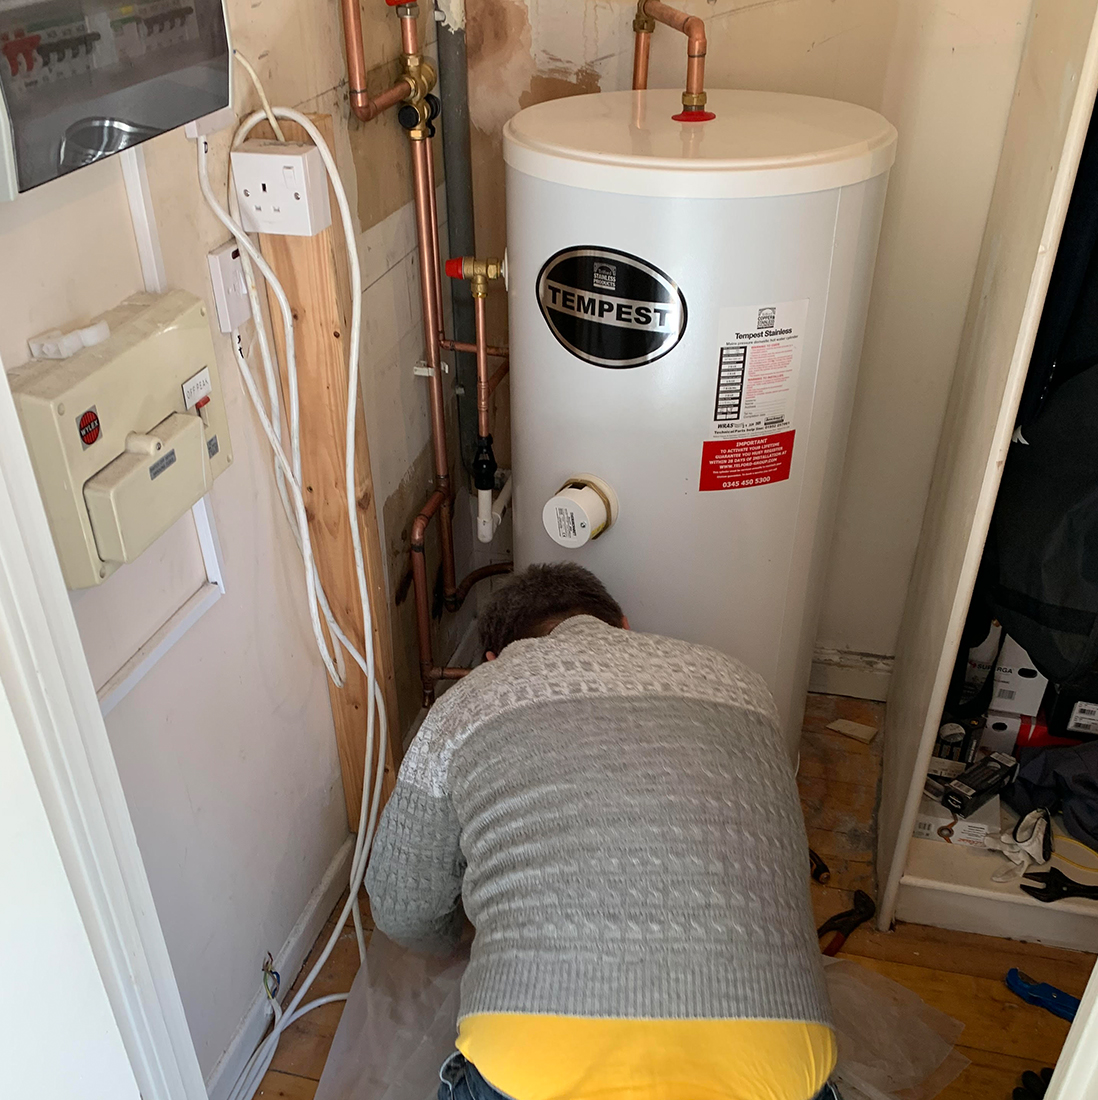 Heating services in Beckton, East London